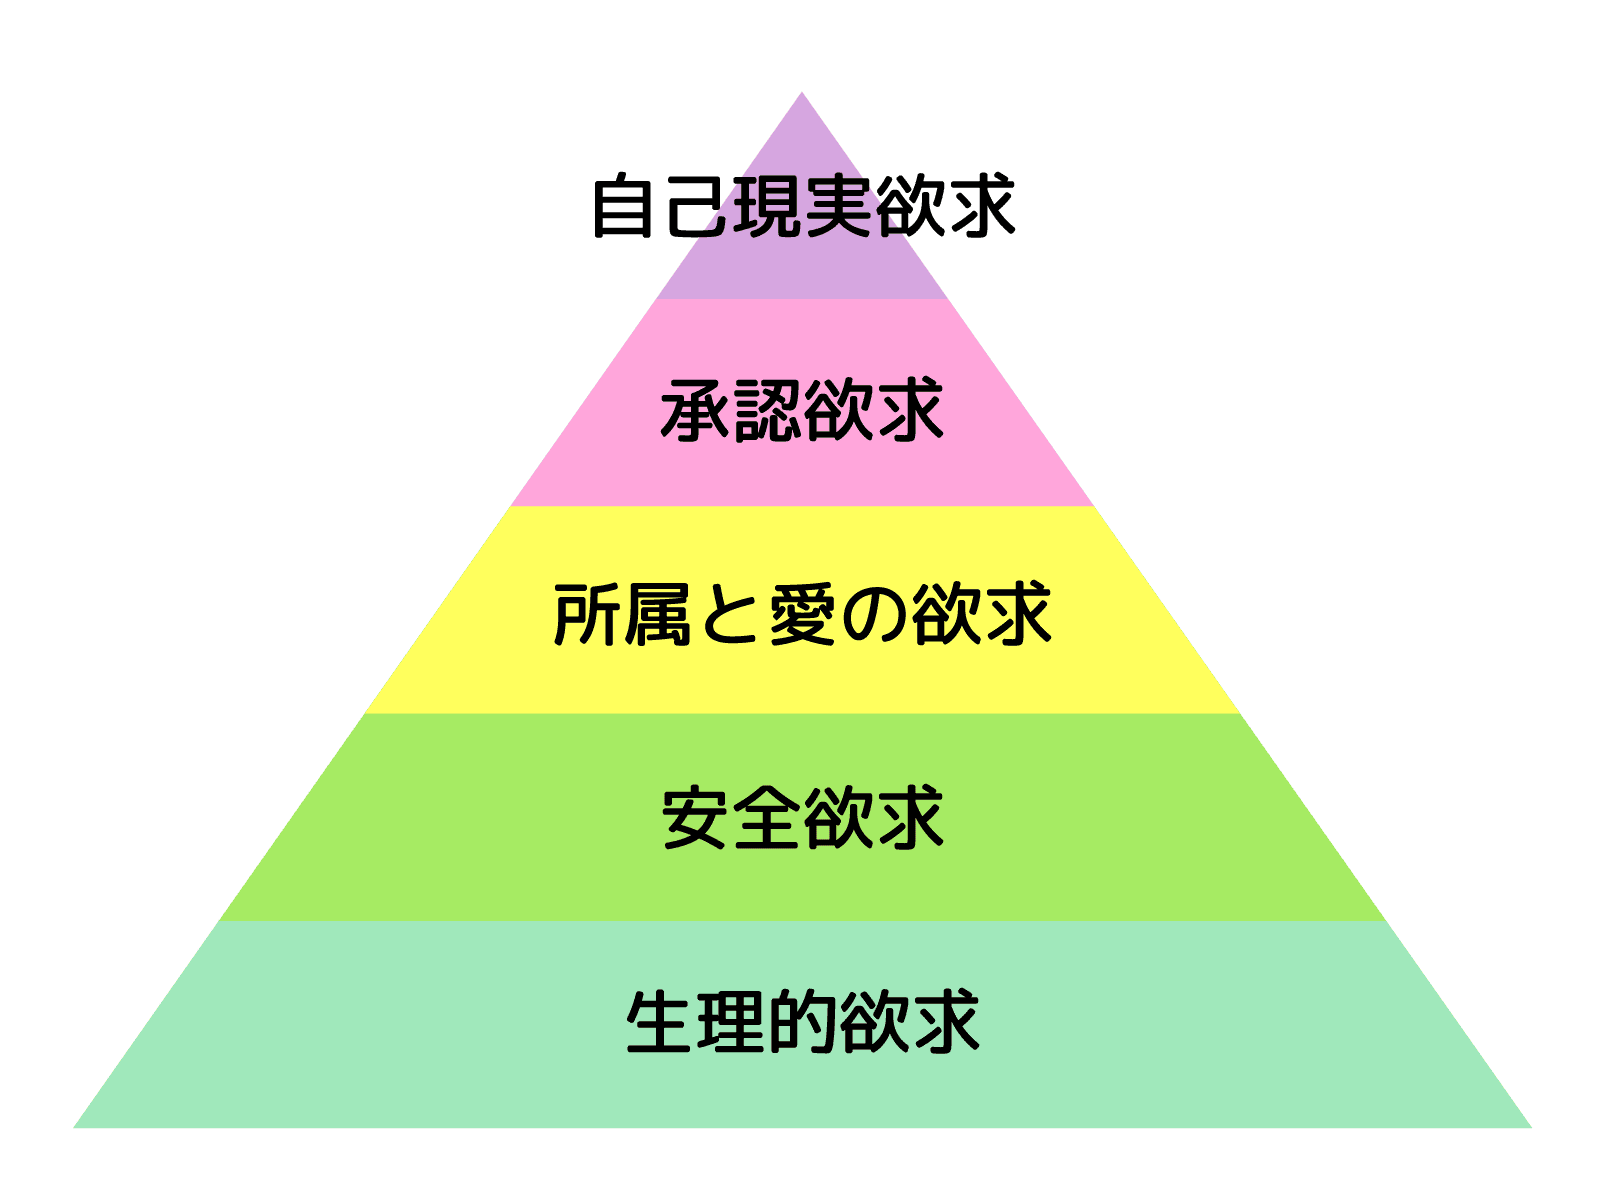 maslows-hierarchy-of-needs1